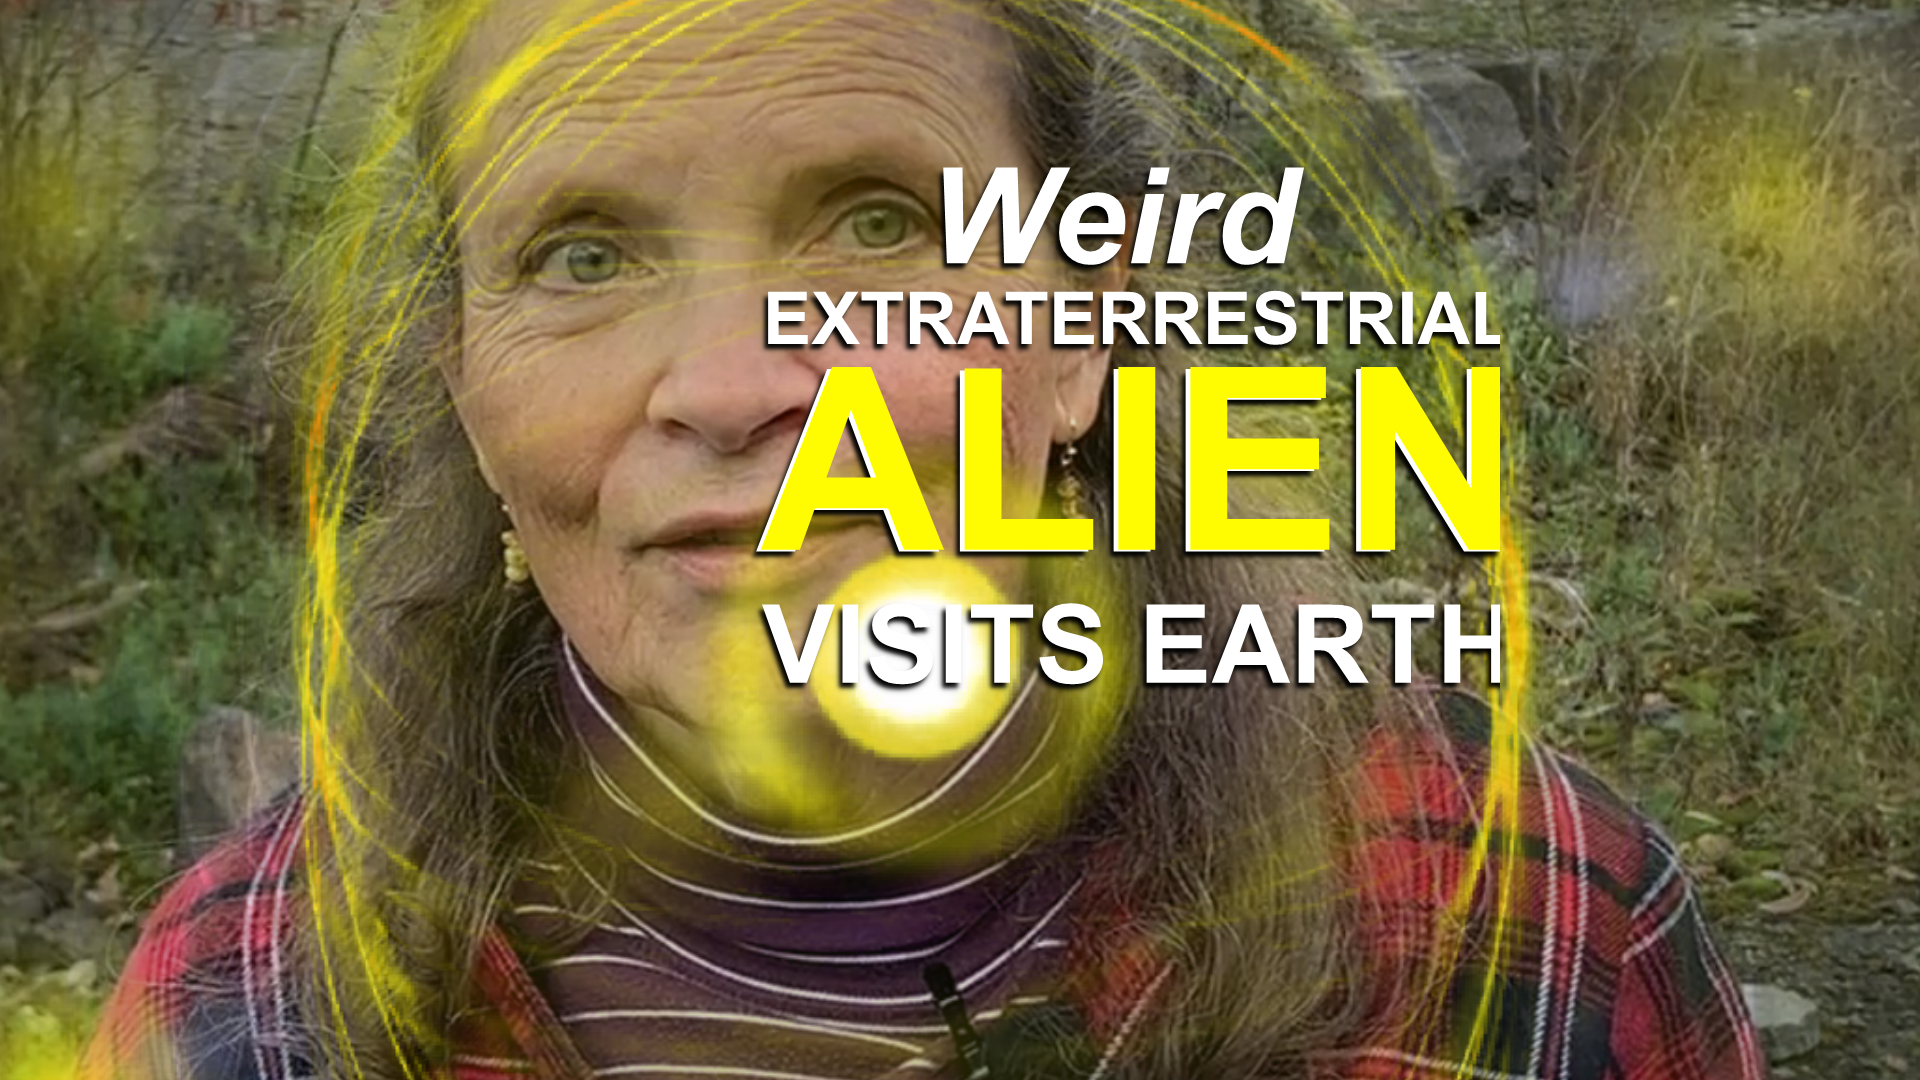 Extraterrestrial Alien Visits Earth